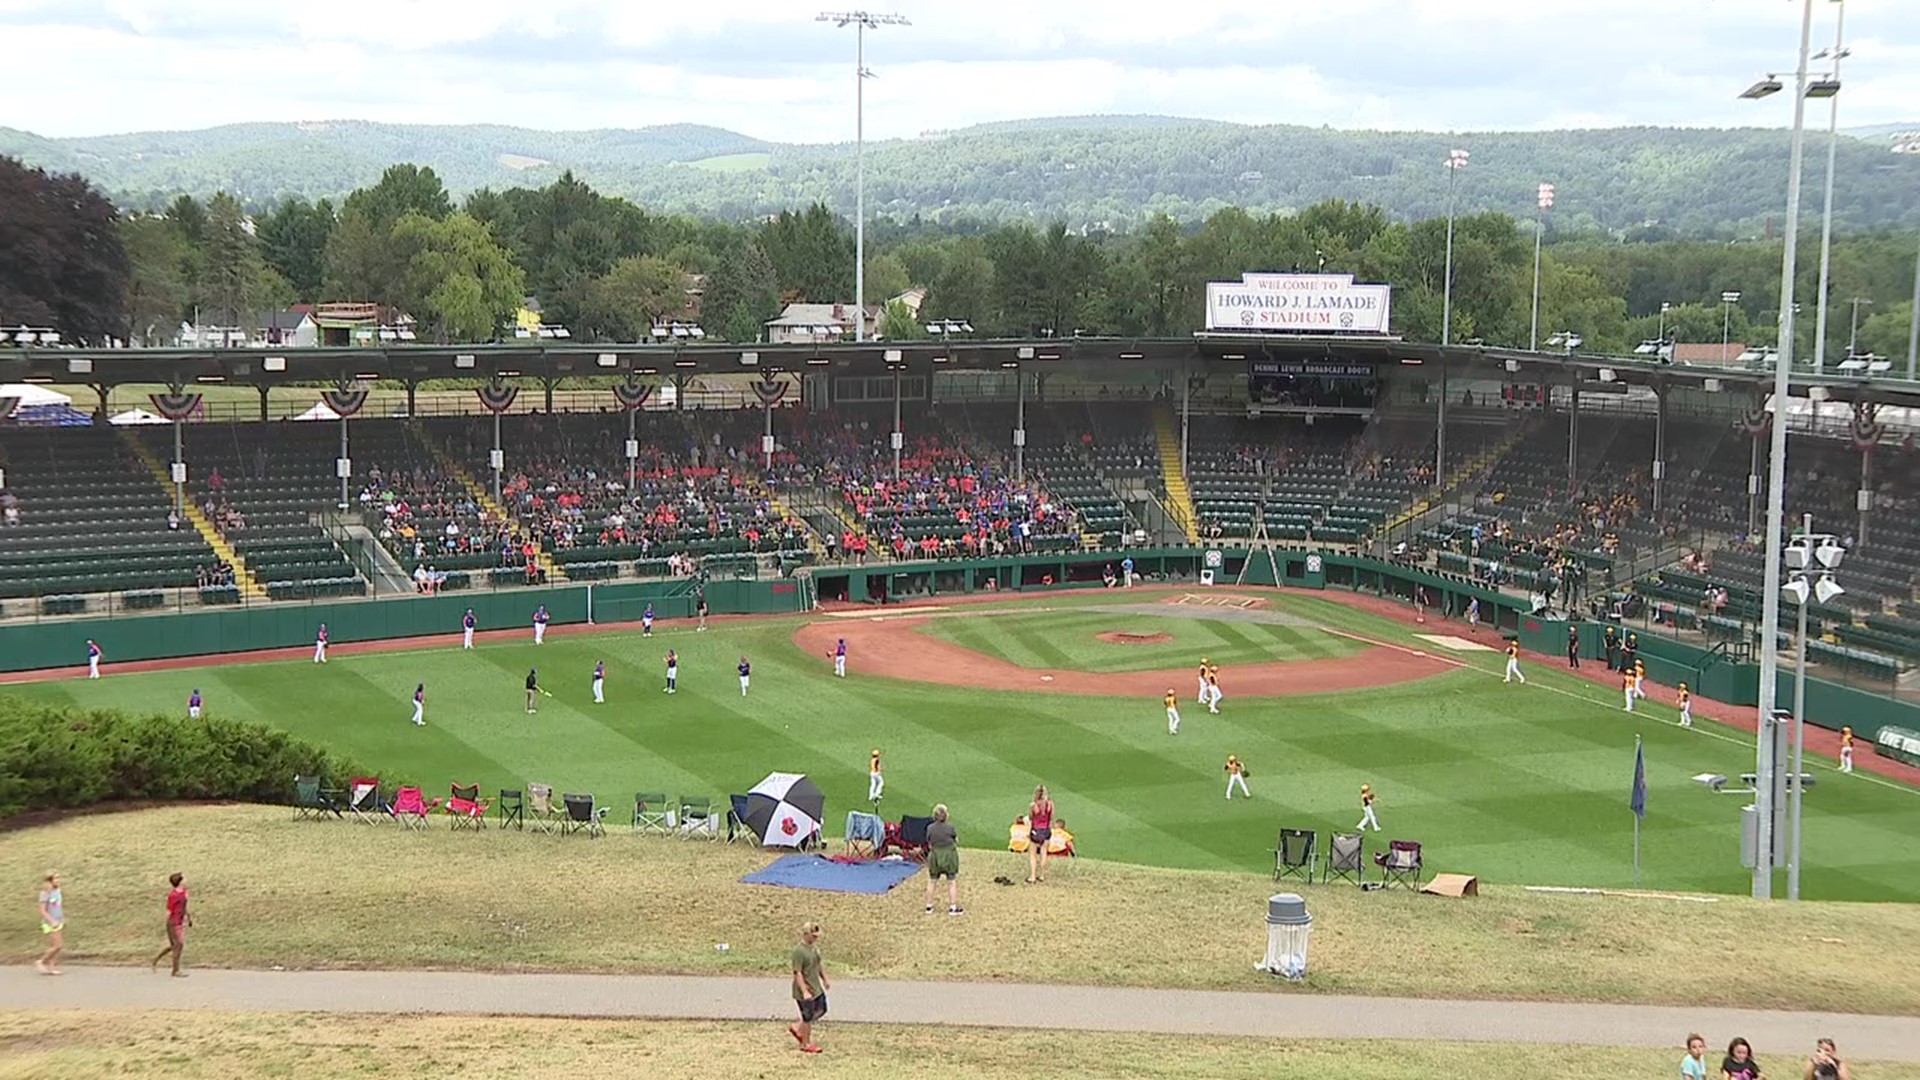 Traveling is expensive nowadays, especially when you book things last minute. That's the reality for families of the athletes at the Little League World Series.